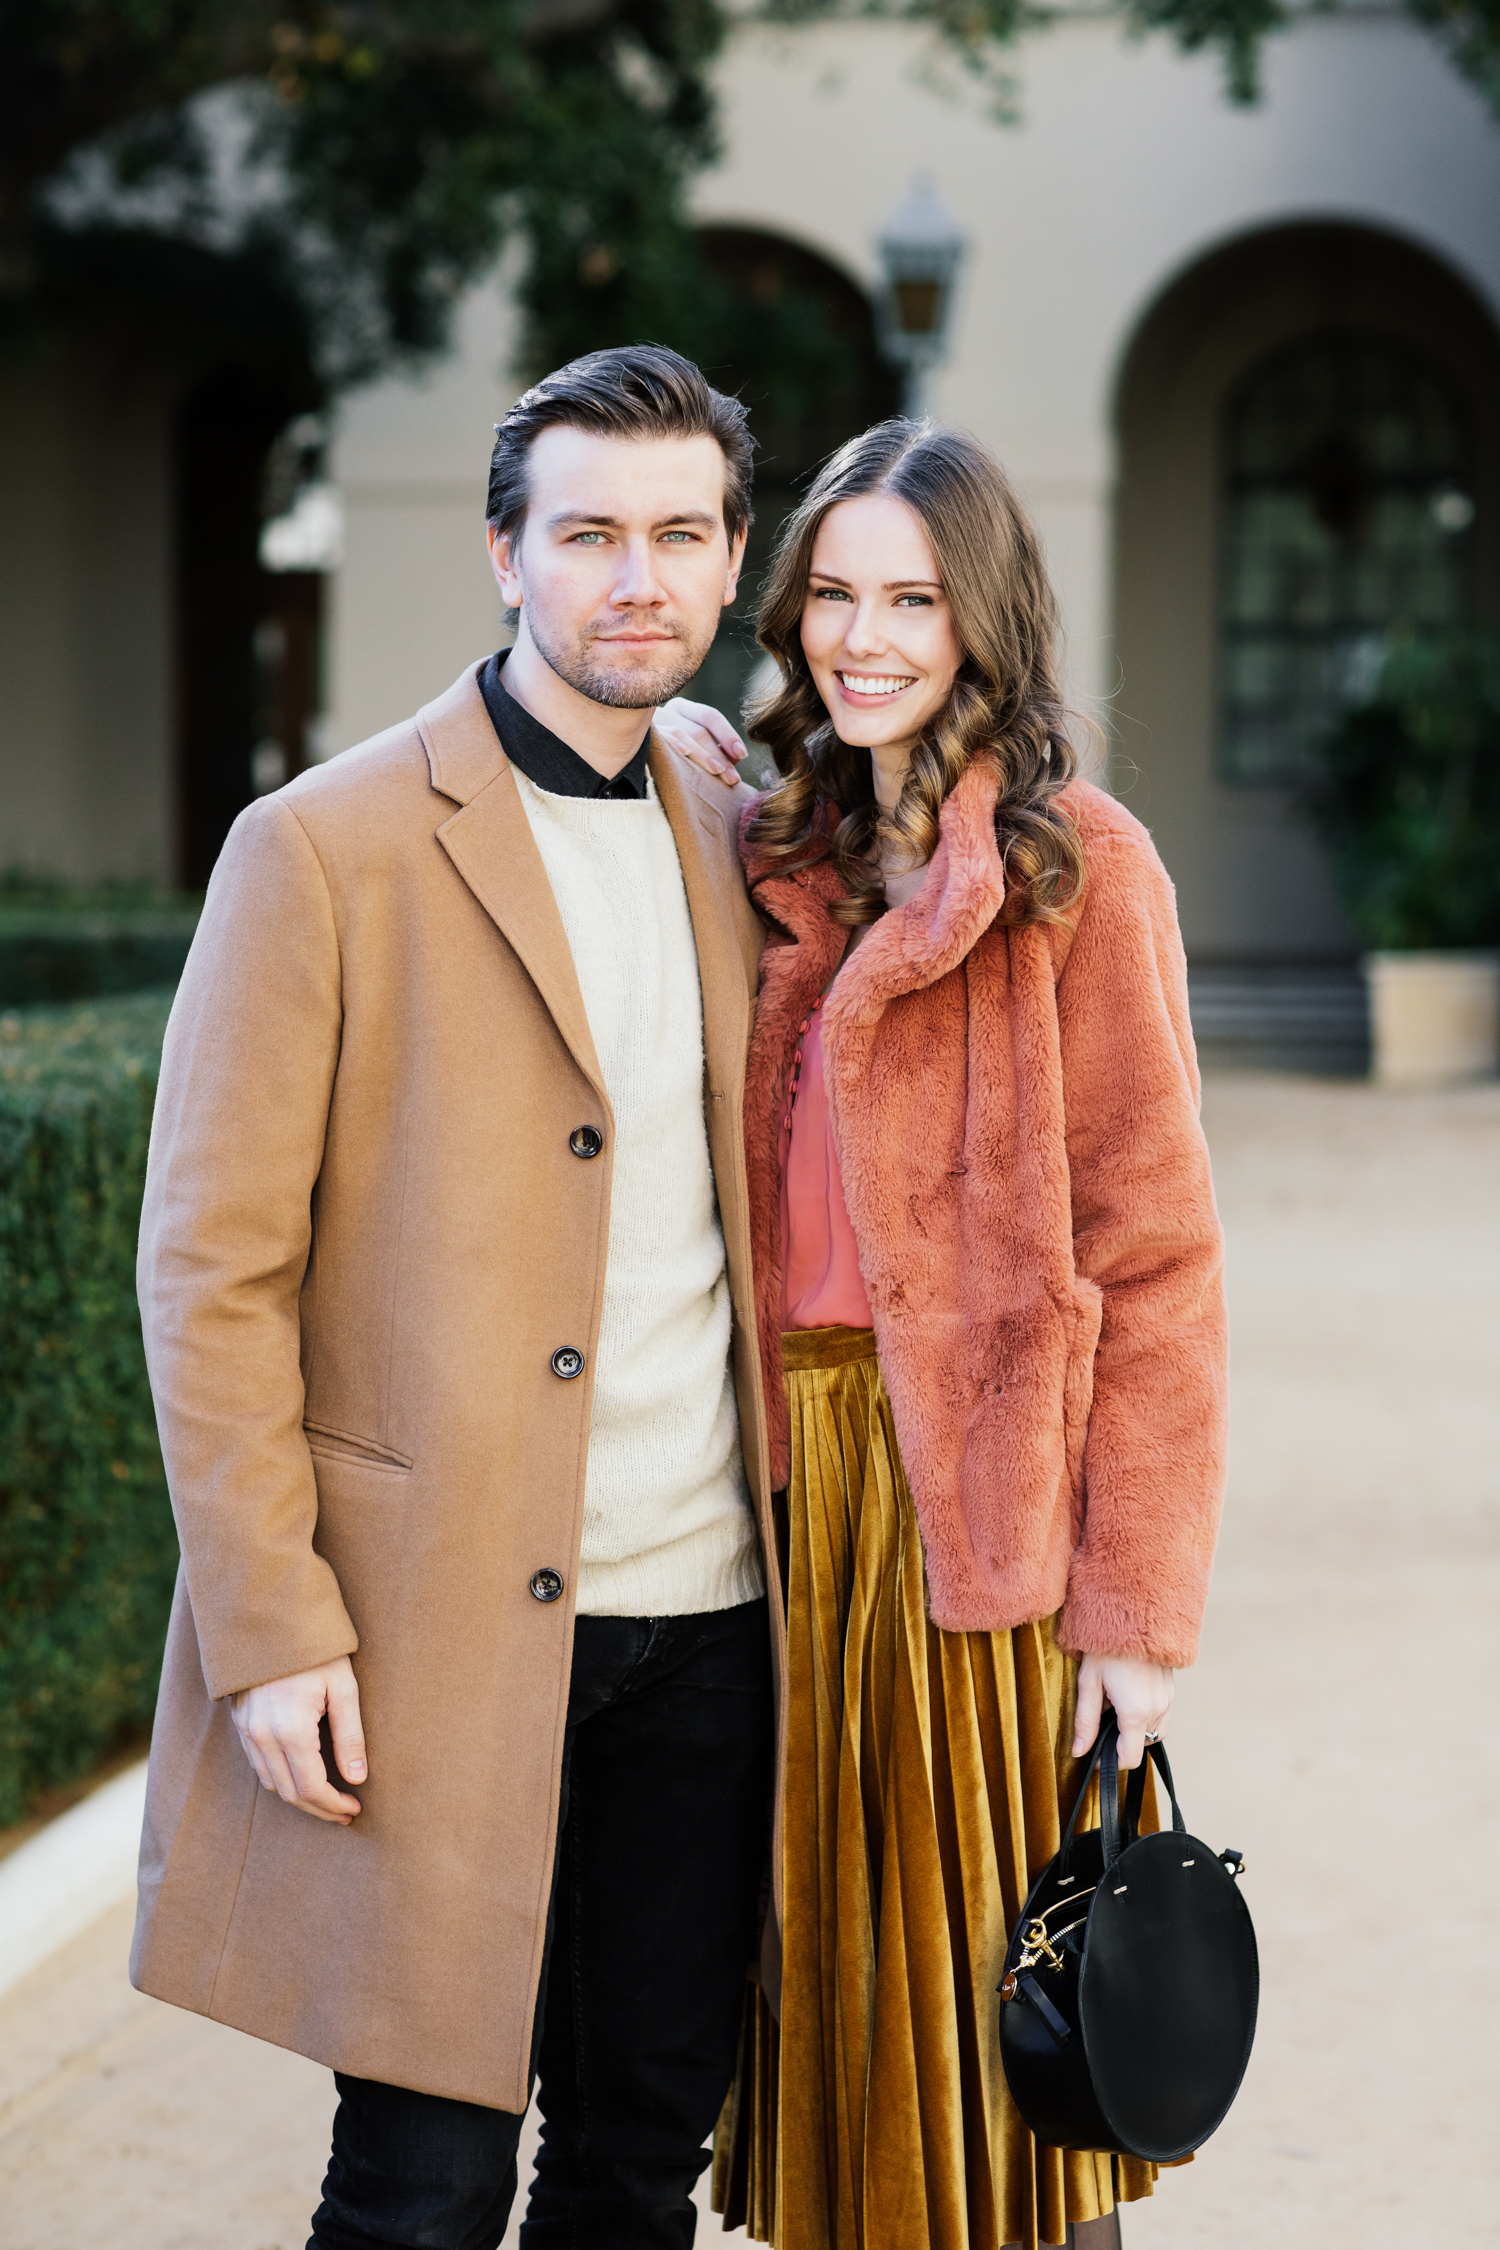 Torrance Coombs and Alyssa Campanella of The A List blog share their New Year's 2017 Q&A with Alyssa and Torrance